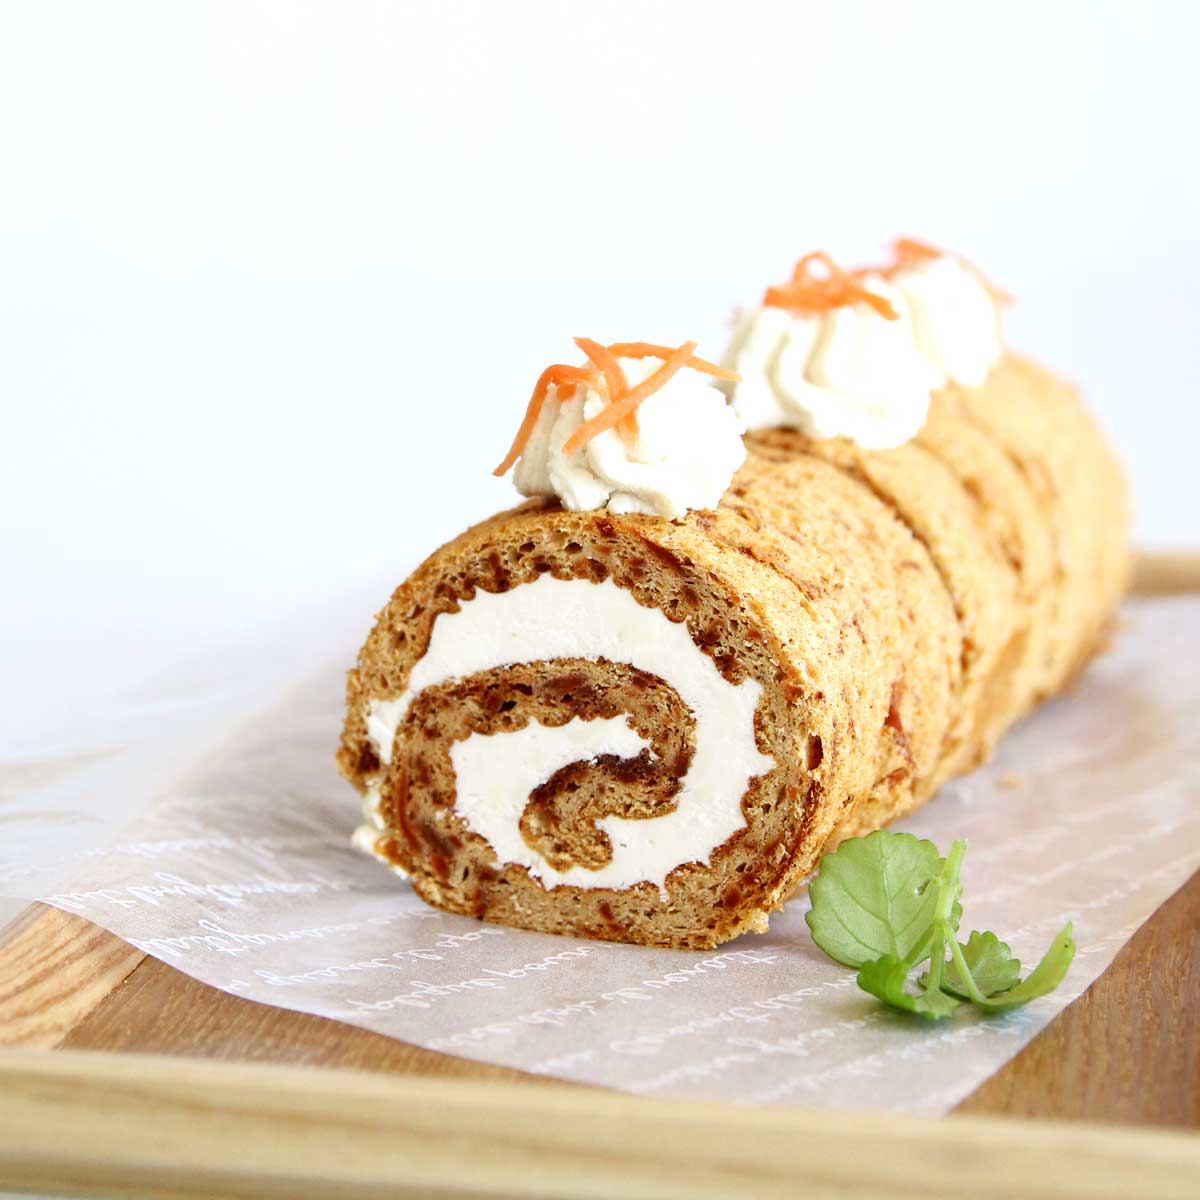 Gluten Free Carrot Swiss Roll Cake Recipe to Make for Easter - Brown Sugar Whipped Cream